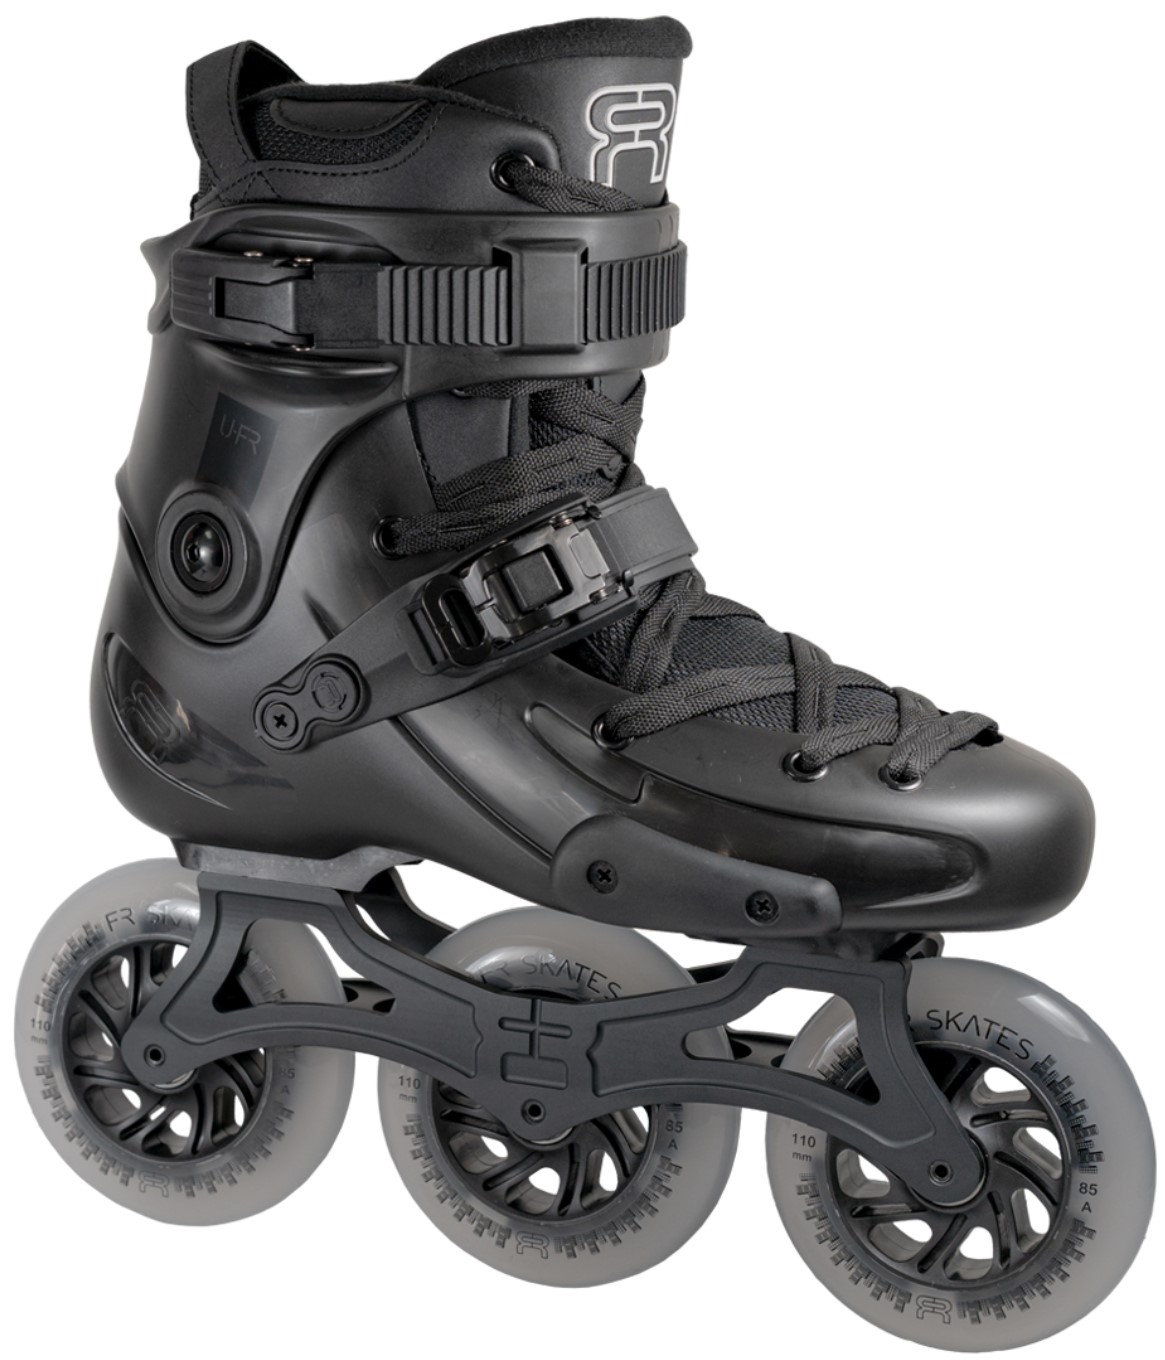 black FR inline skate UFR 310 with three wheels of 110 mm and with an UFS frame